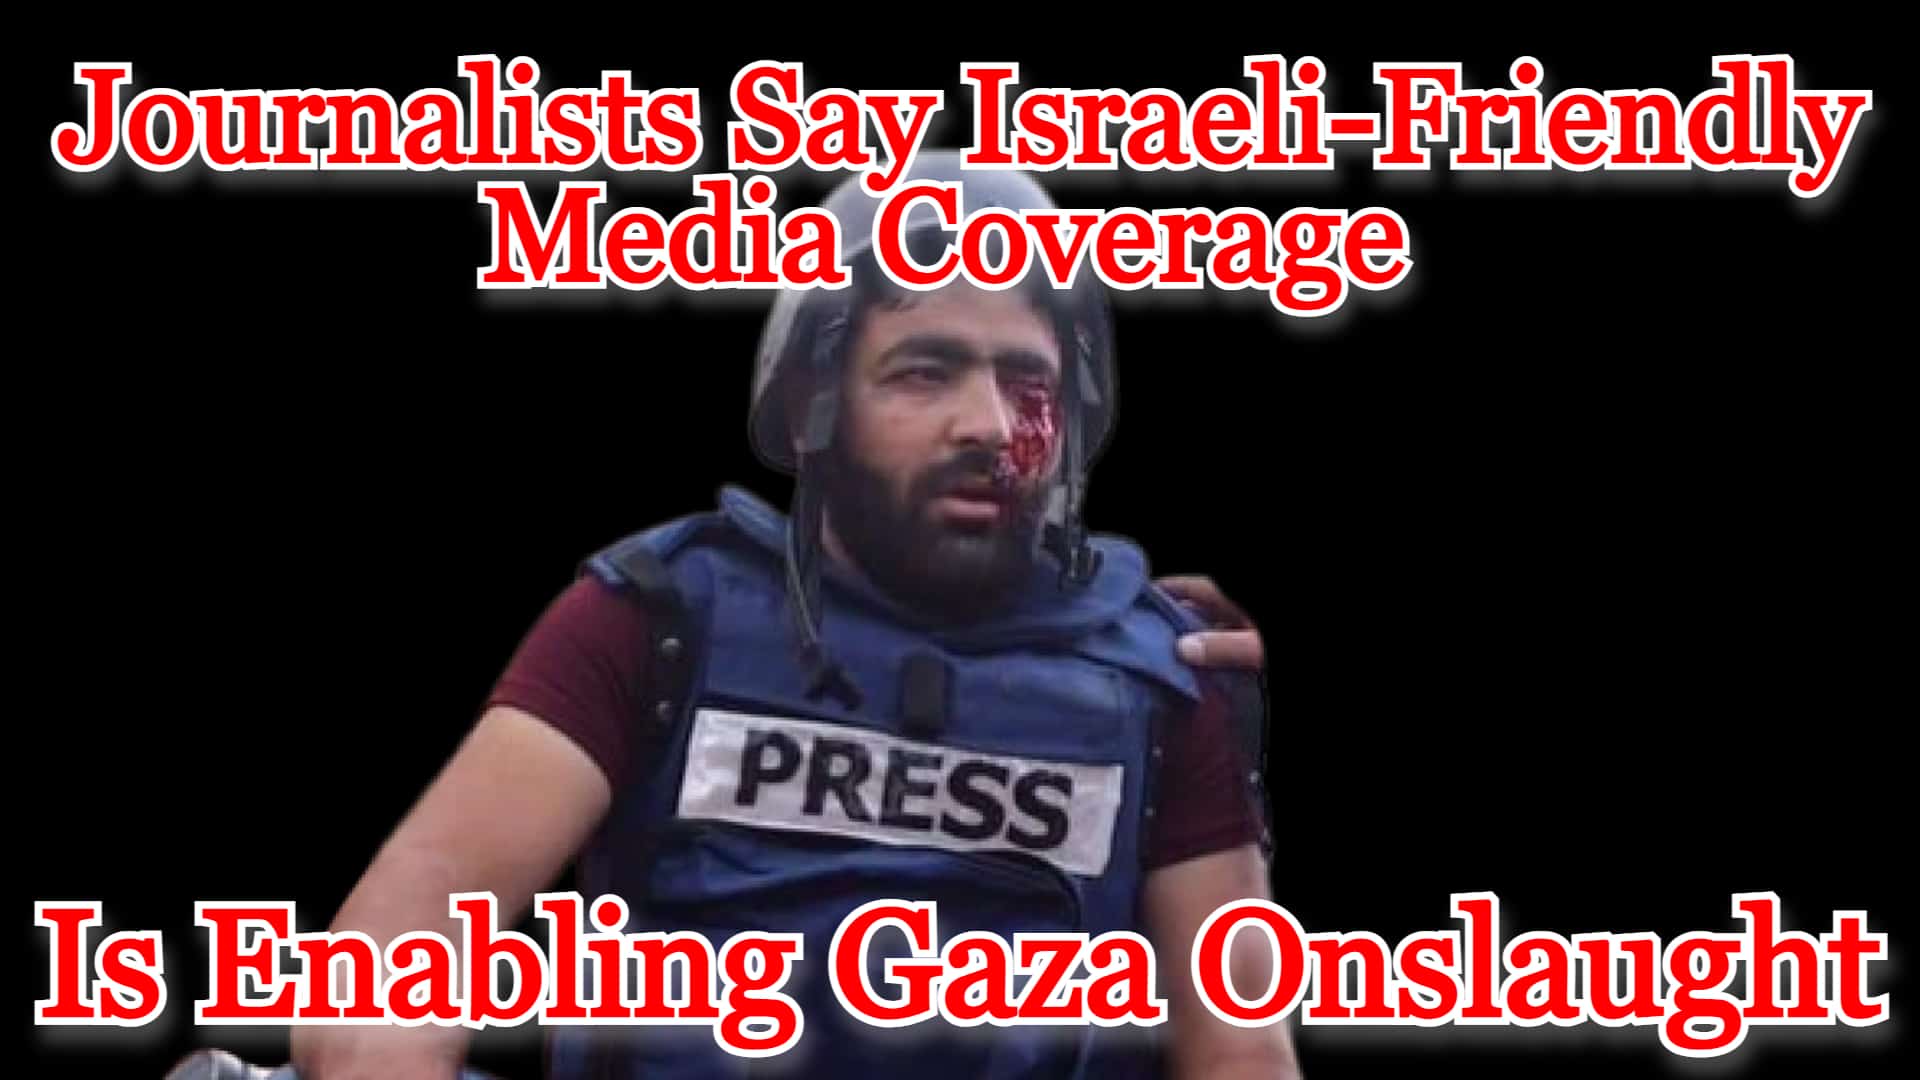 COI #497: Journalists Say Israeli-Friendly Media Coverage Is Enabling Gaza Onslaught